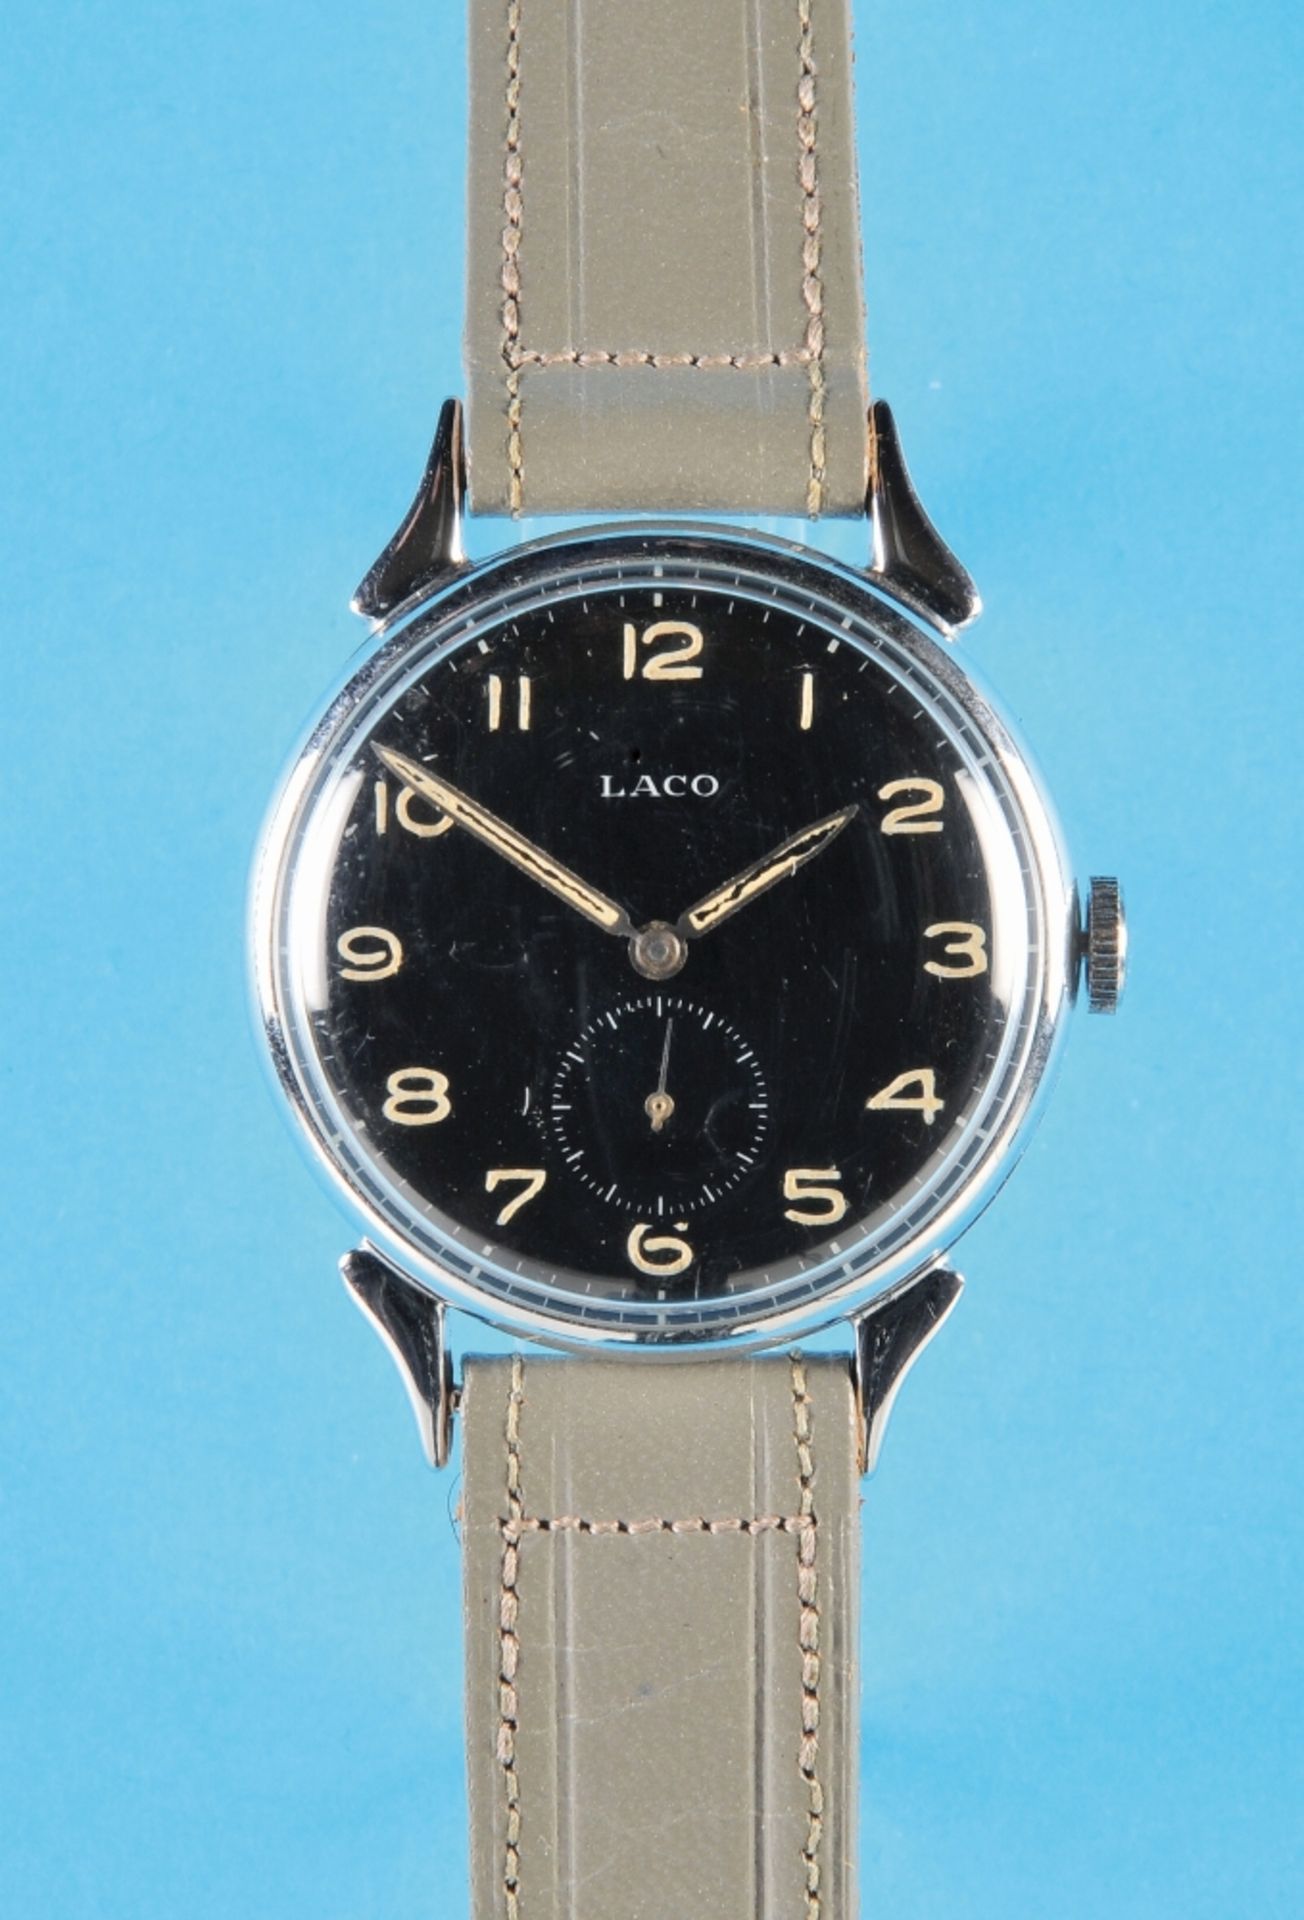 Laco military wristwatch with special lugs,cal. Laco 524, 1940s, case with stainless steel push bac